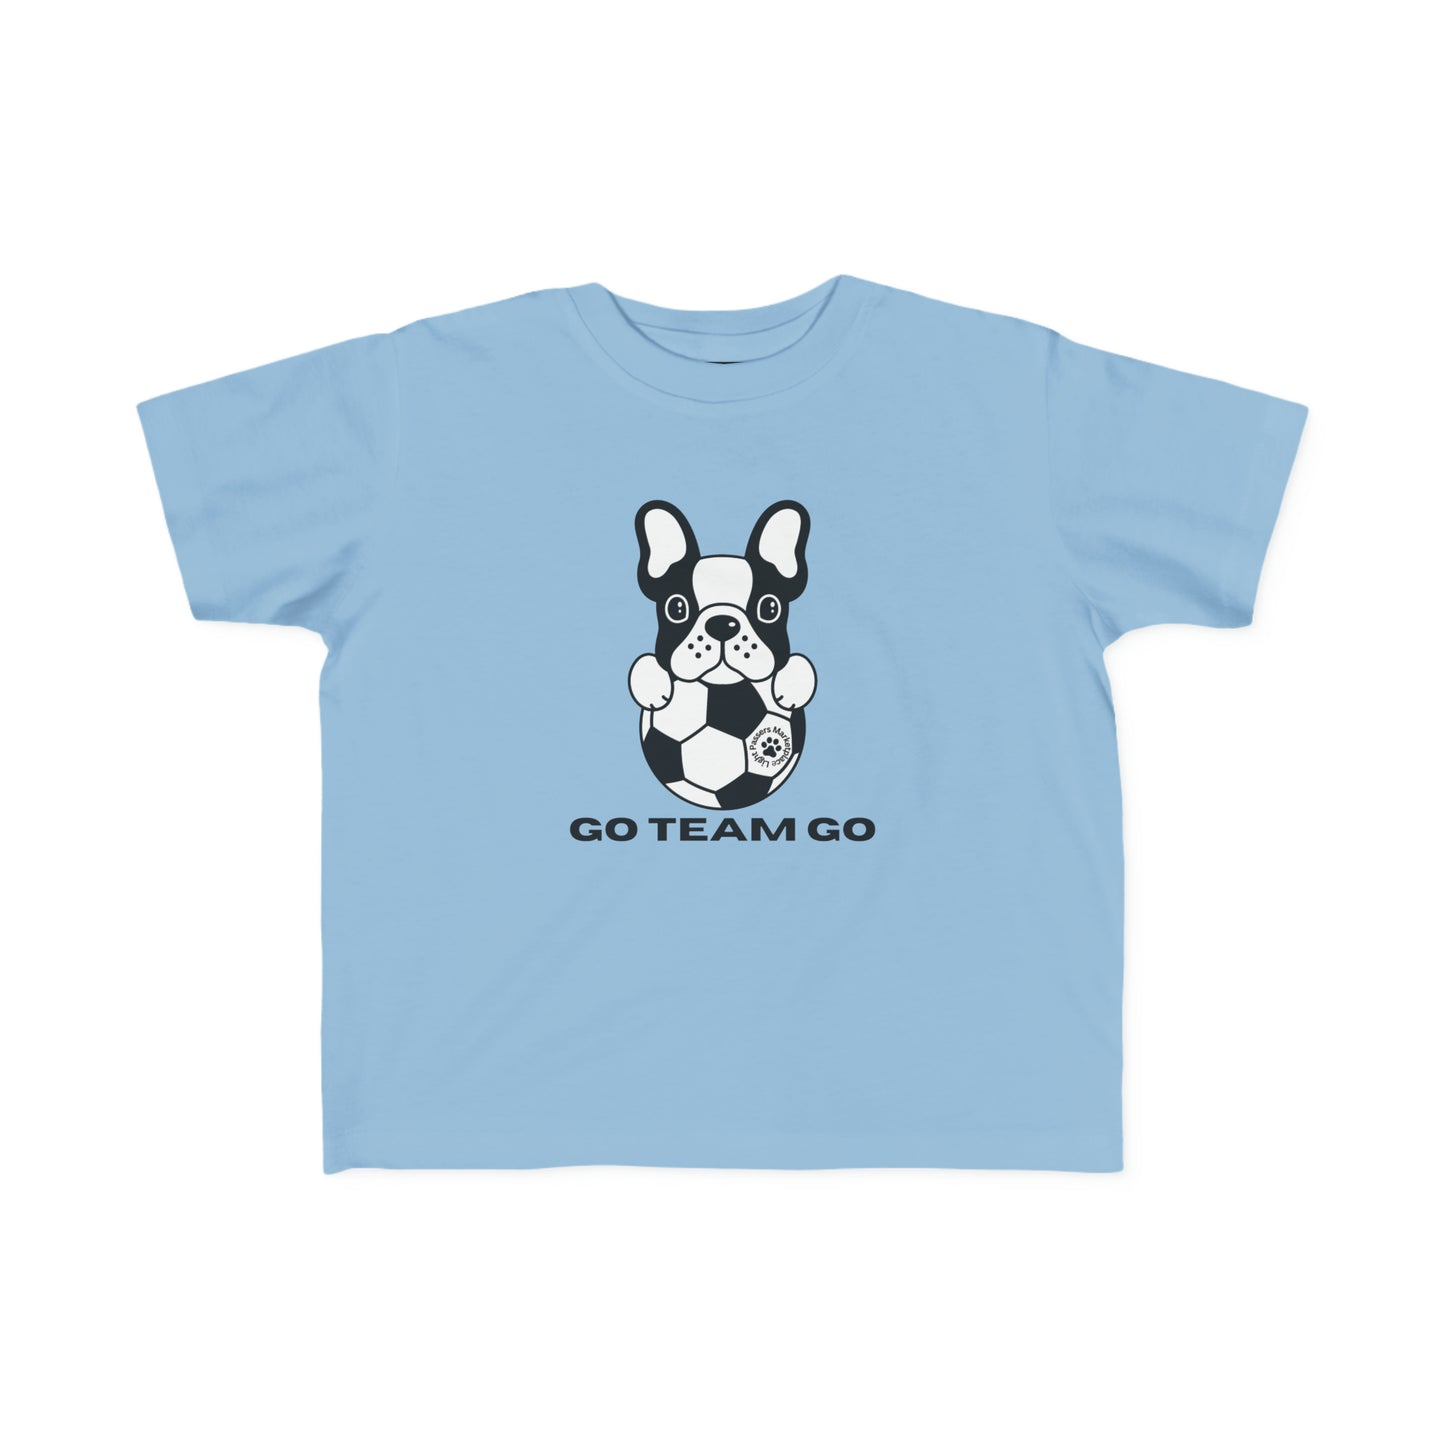 A toddler tee featuring a dog playing soccer, ideal for sensitive skin. Made of 100% combed cotton, light fabric, and a tear-away label. Classic fit, durable print, perfect for little adventurers.